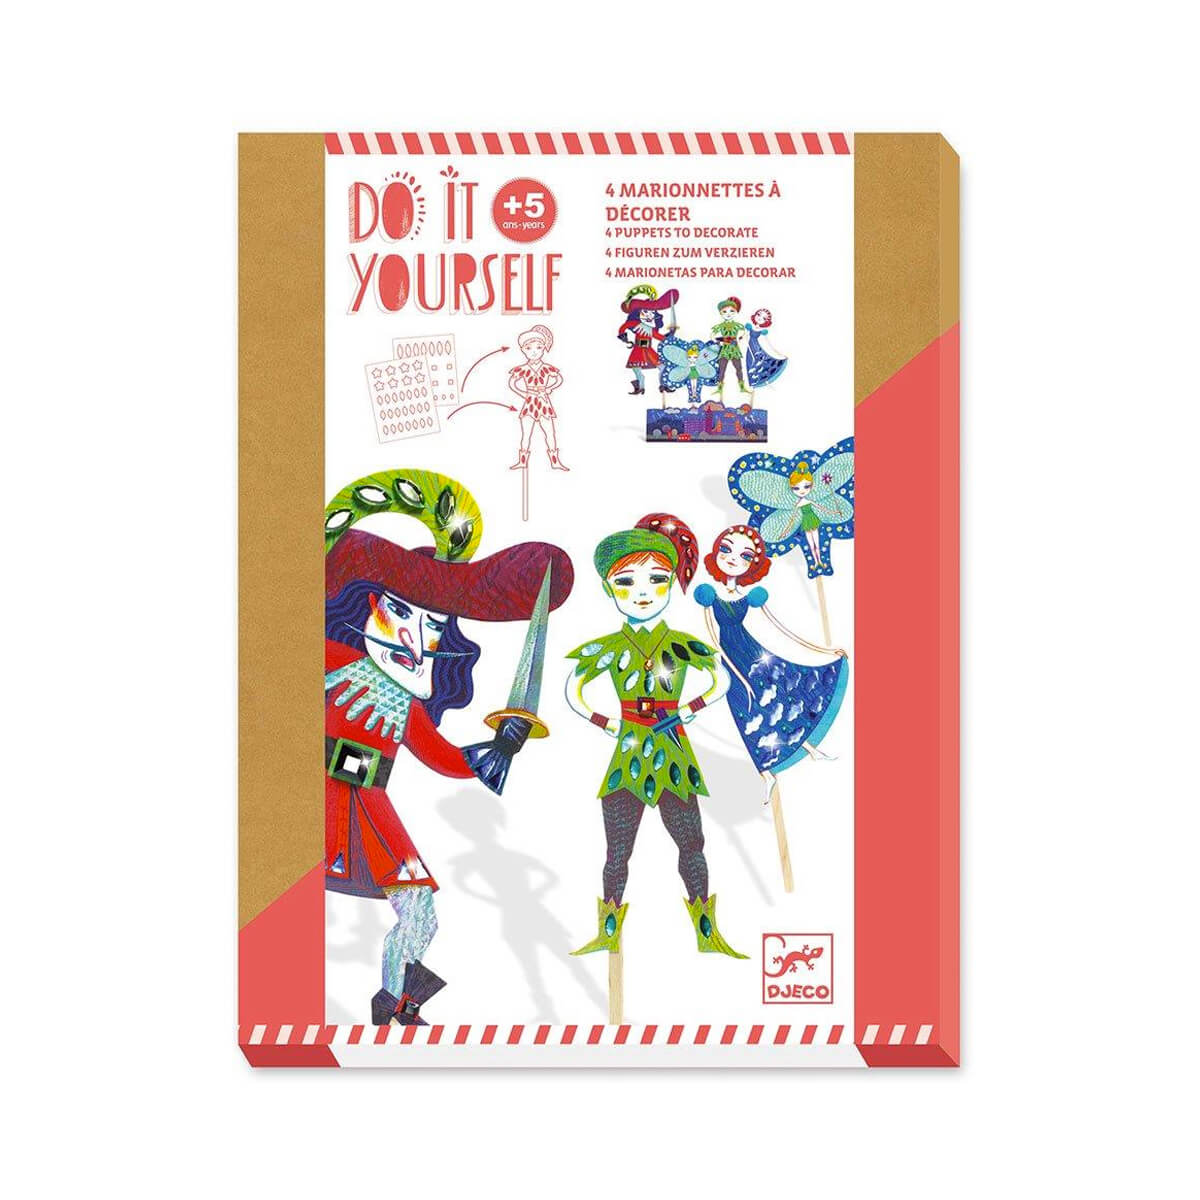 Peter Pan Puppets Paper Craft Kit by Djeco – Junior Edition